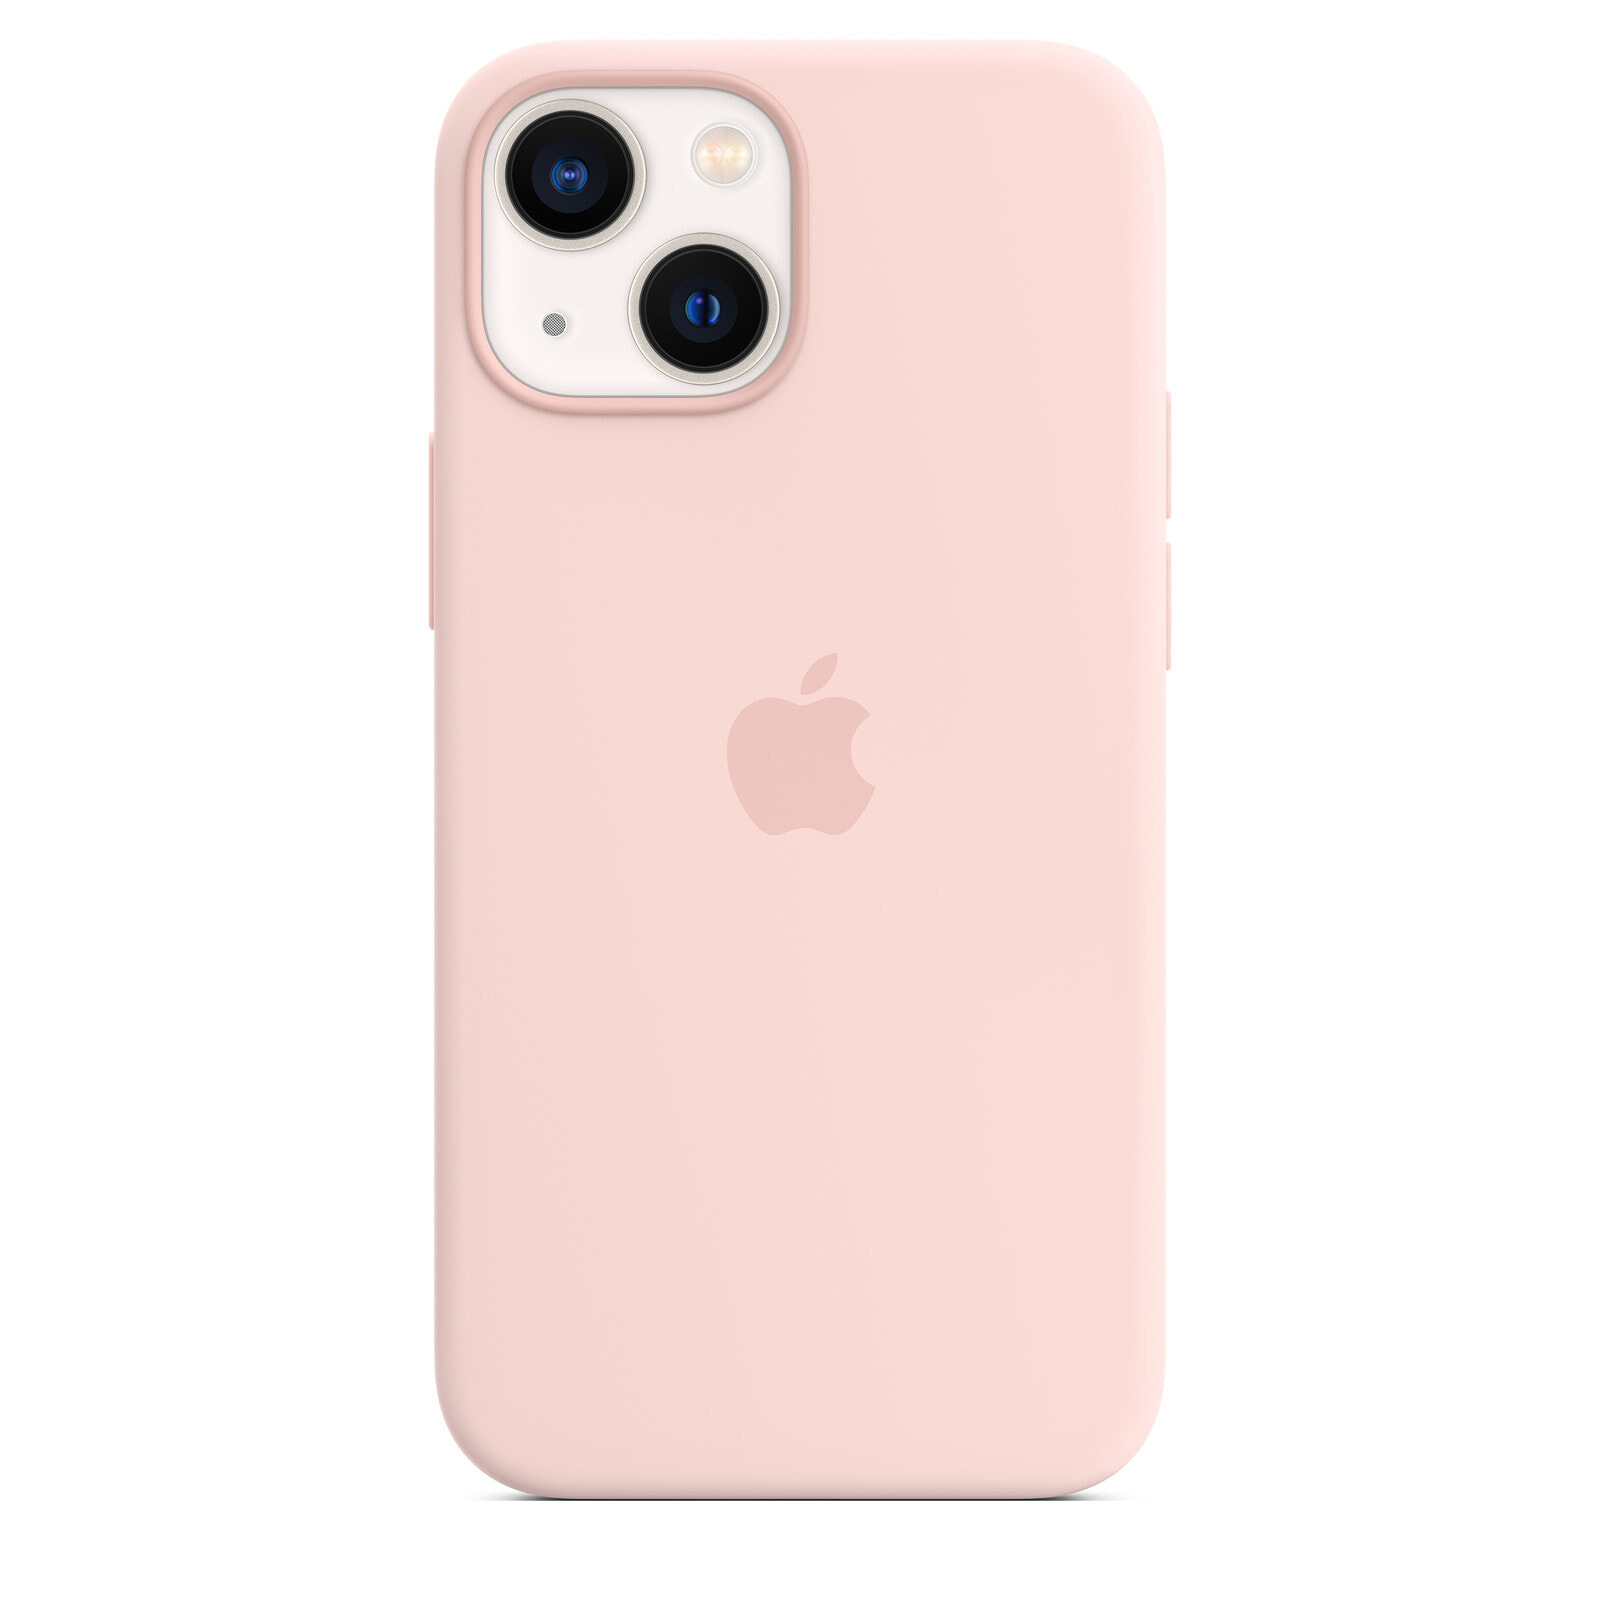 Apple iPhone 13 mini Silicone Case with MagSafe - Chalk Pink - Cover - Apple - iPhone 13 mini - 13.7 cm (5.4